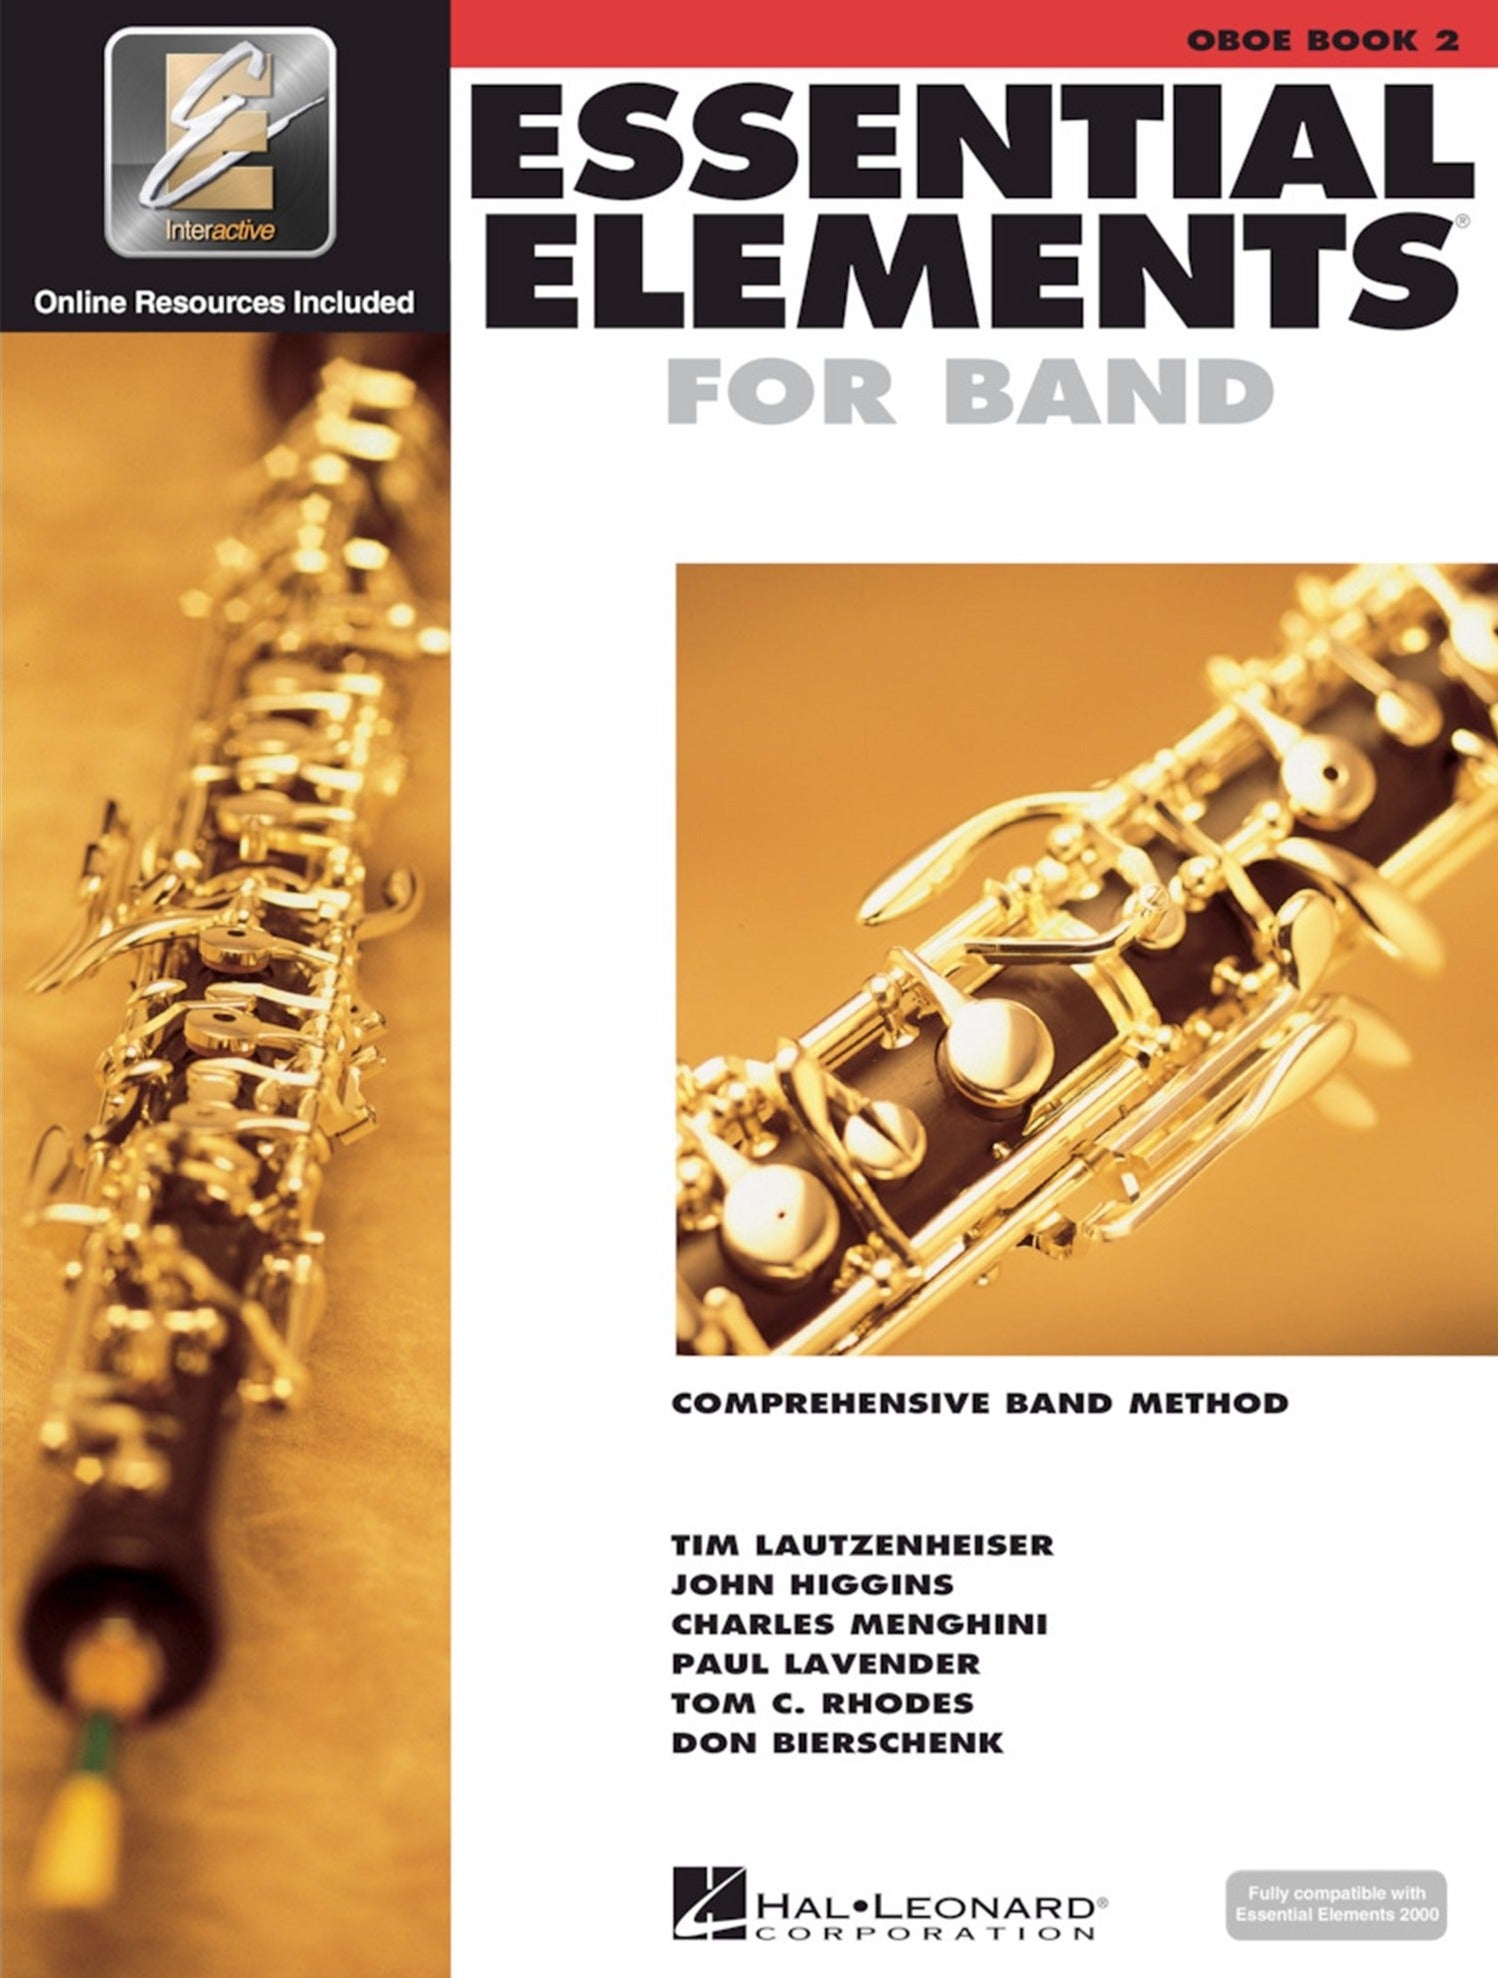 Essential Elements for Band – Oboe Book 2